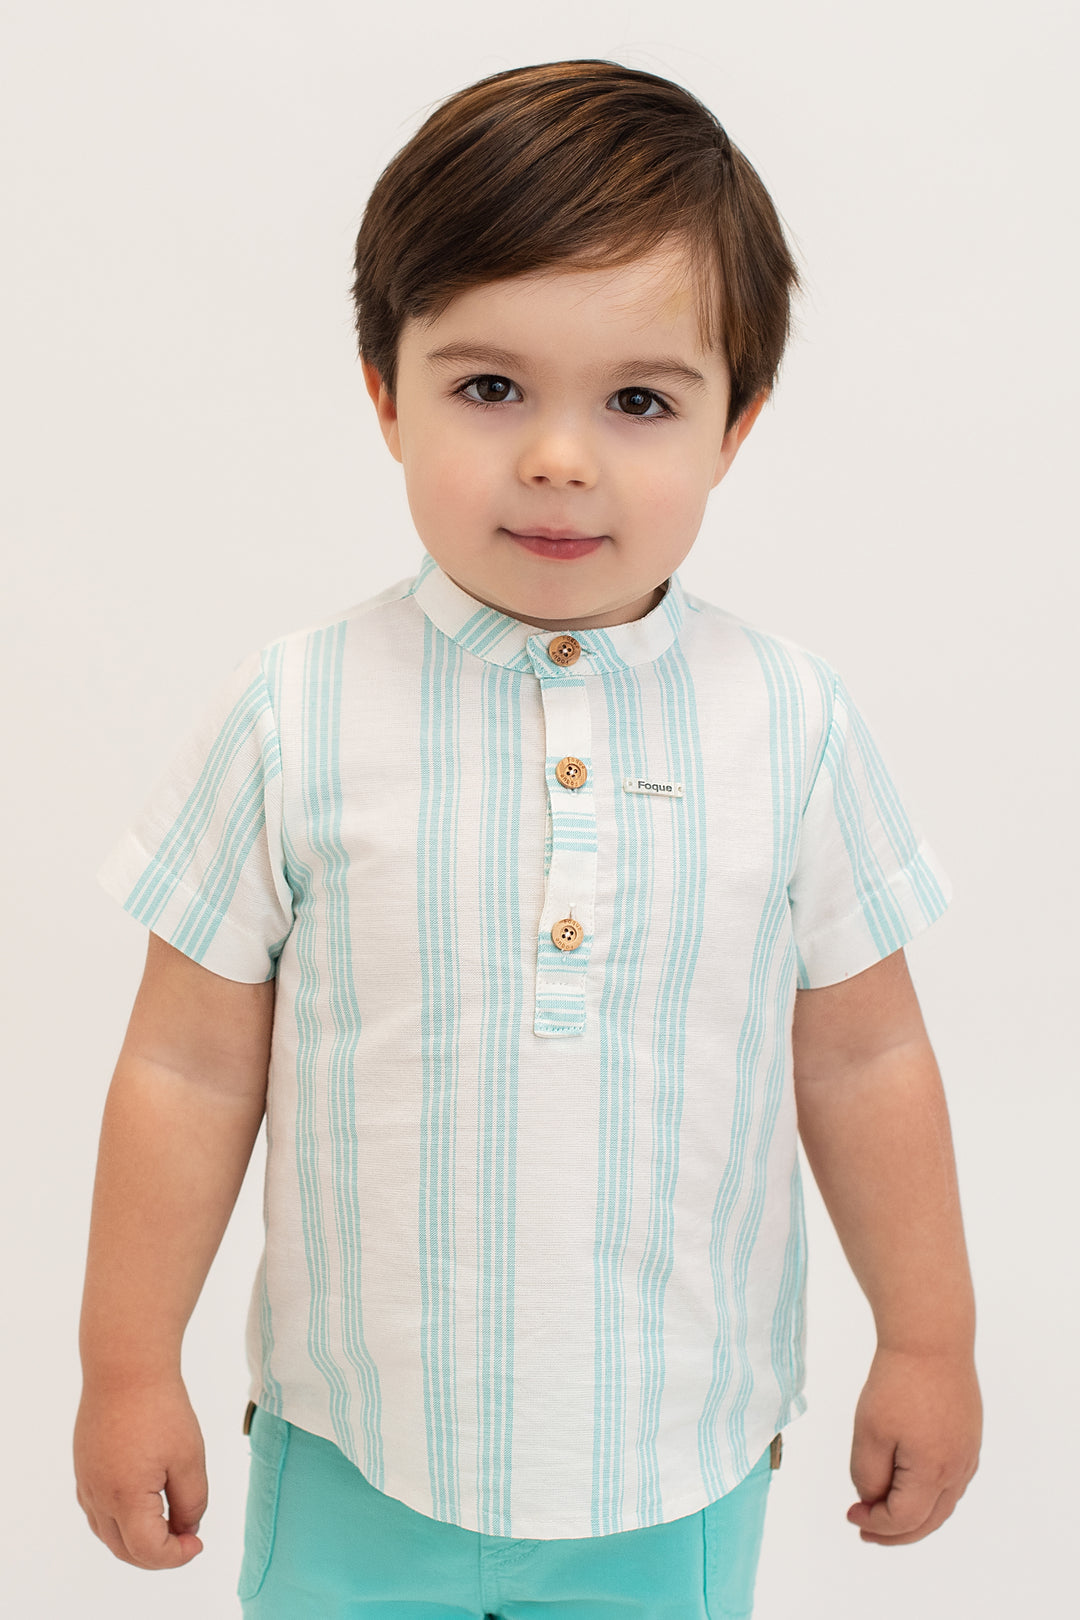 Foque "Rían" Turquoise Striped Shirt & Shorts | iphoneandroidapplications